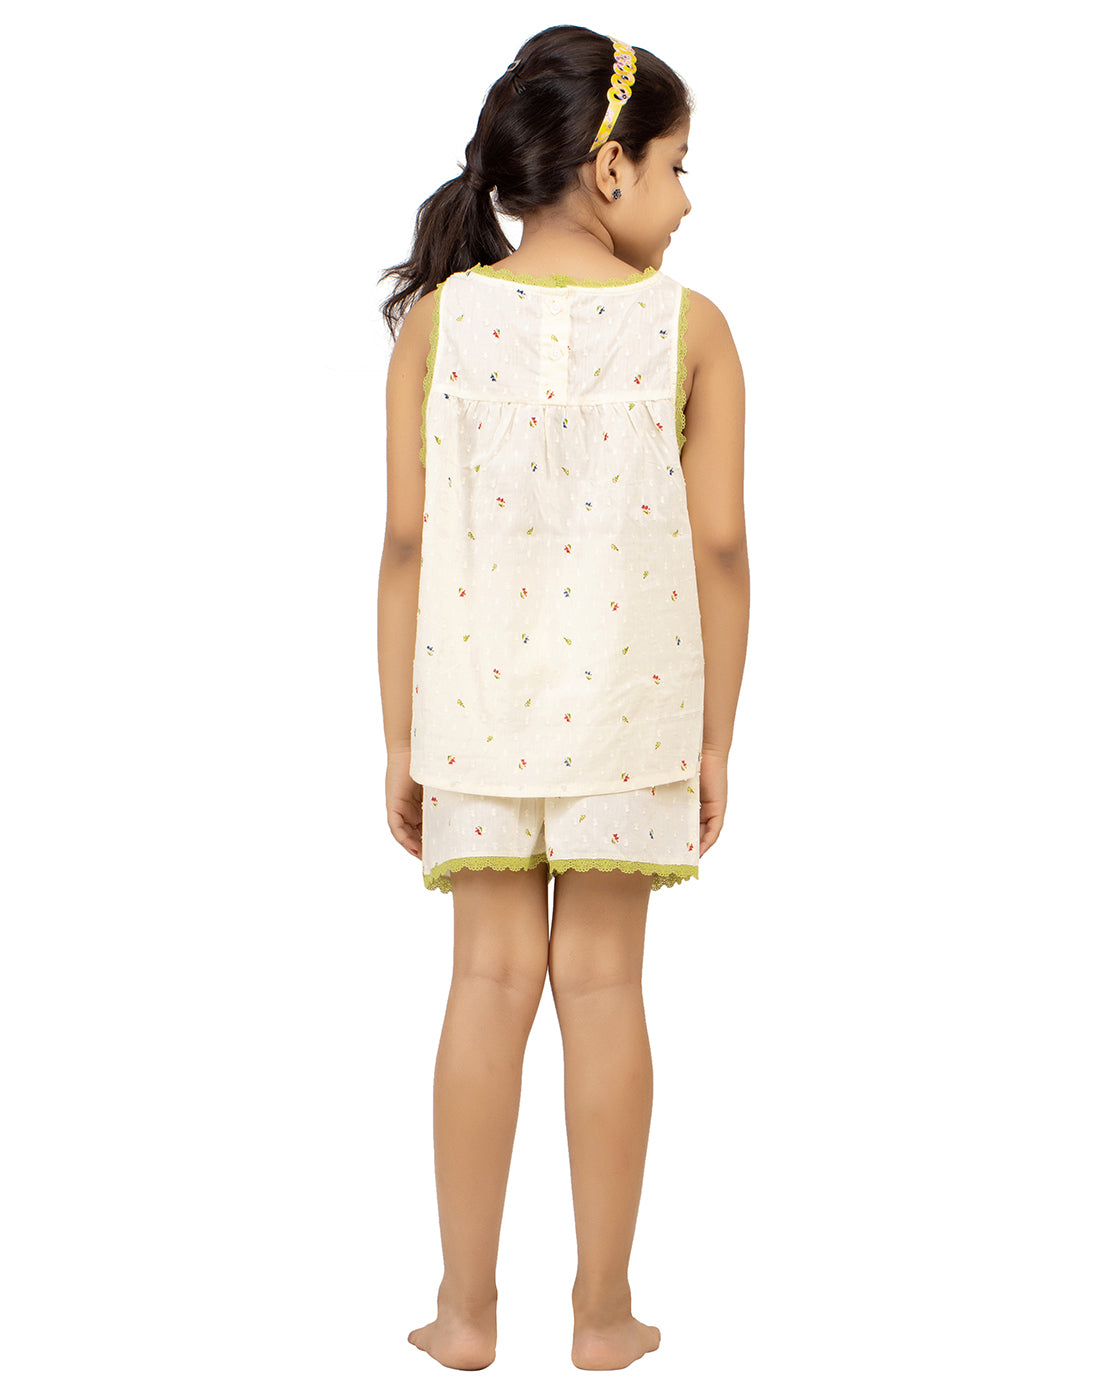 Night Suit Shorty Set for Girls-Yellow Lace